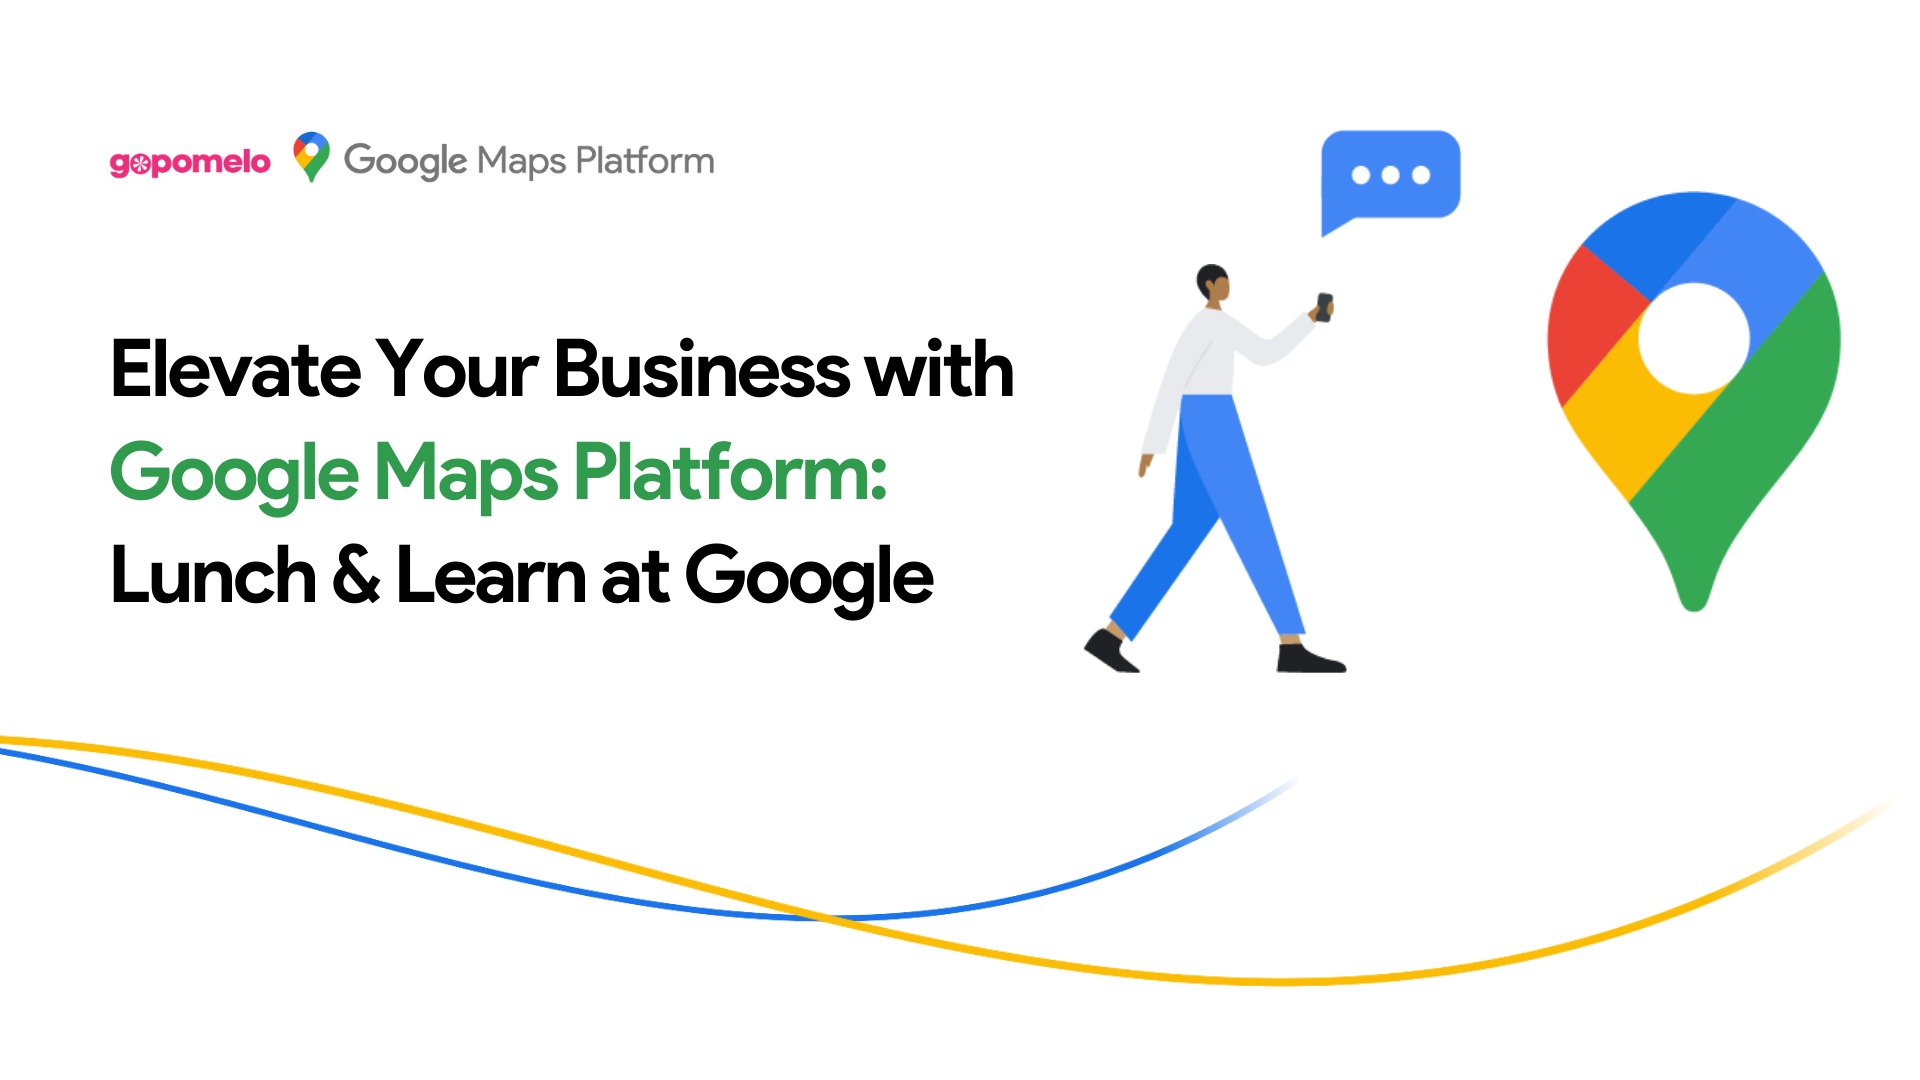 Elevate Your Business with Google Maps Platform: Lunch & Learn at Google